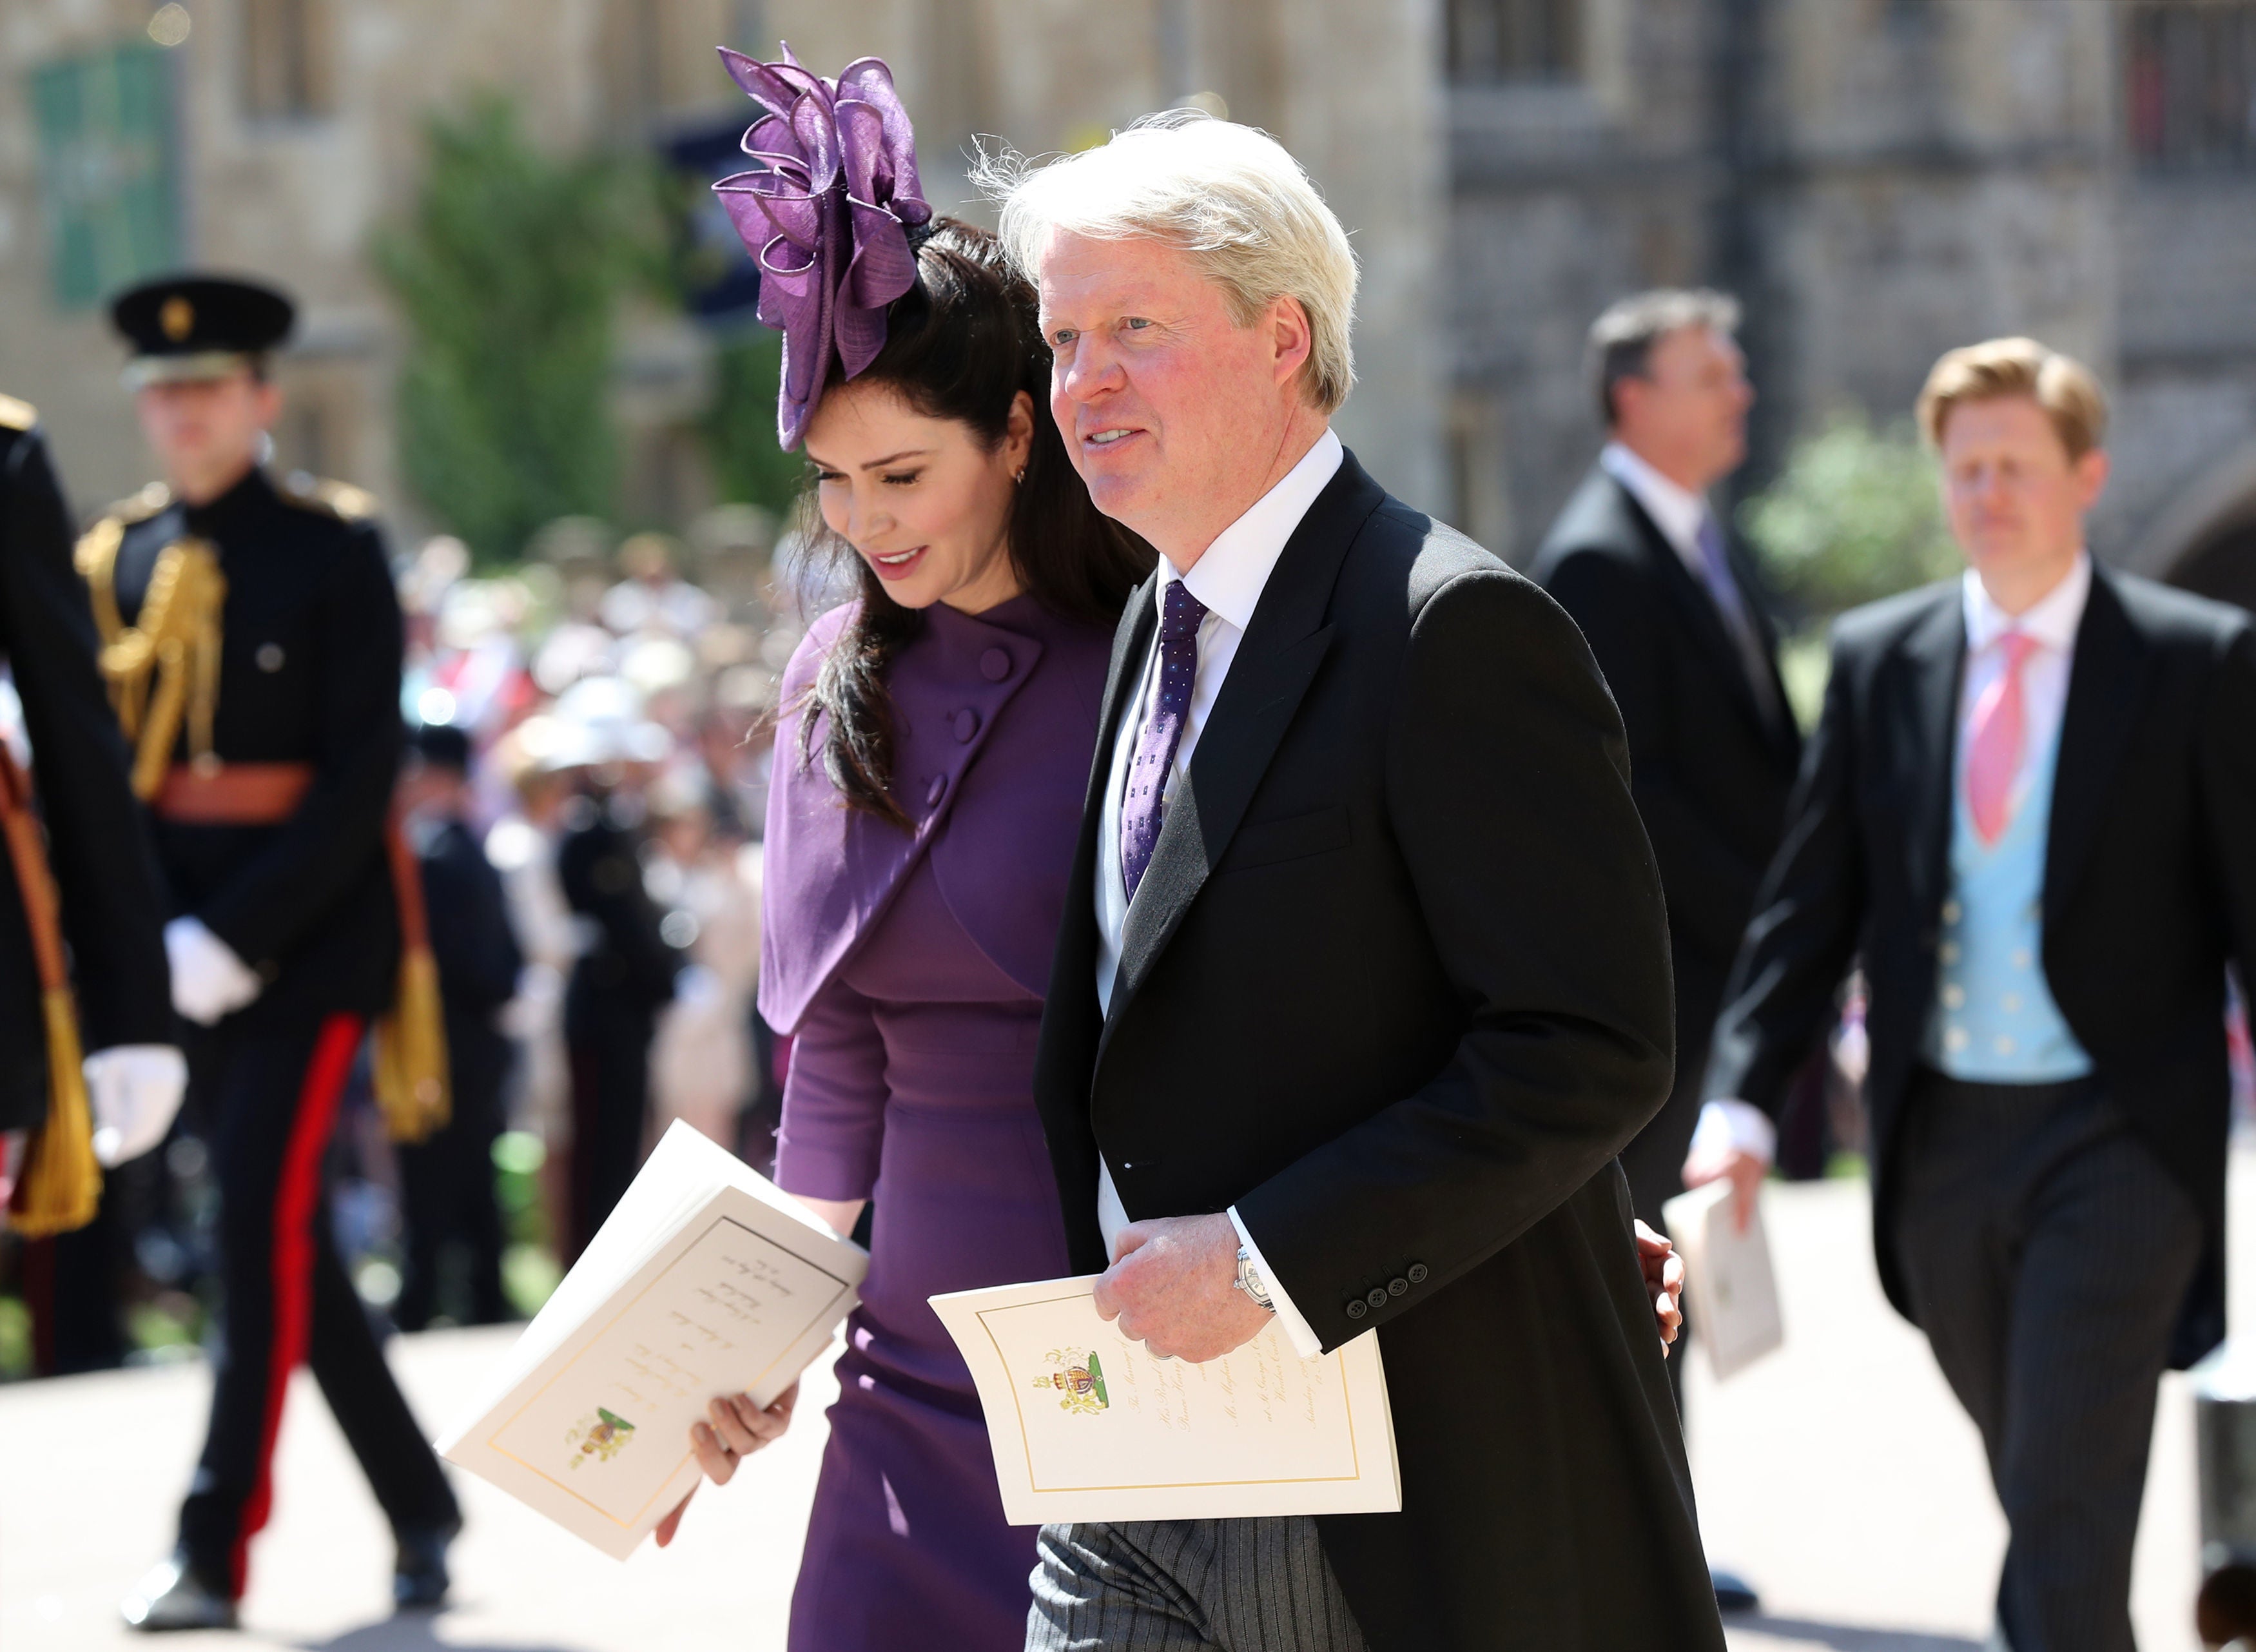 Earl Spencer and Karen Spencer leave St George's Chapel at Windsor Castle after the wedding of Prince Harry to Meghan Markle on May 19, 2018